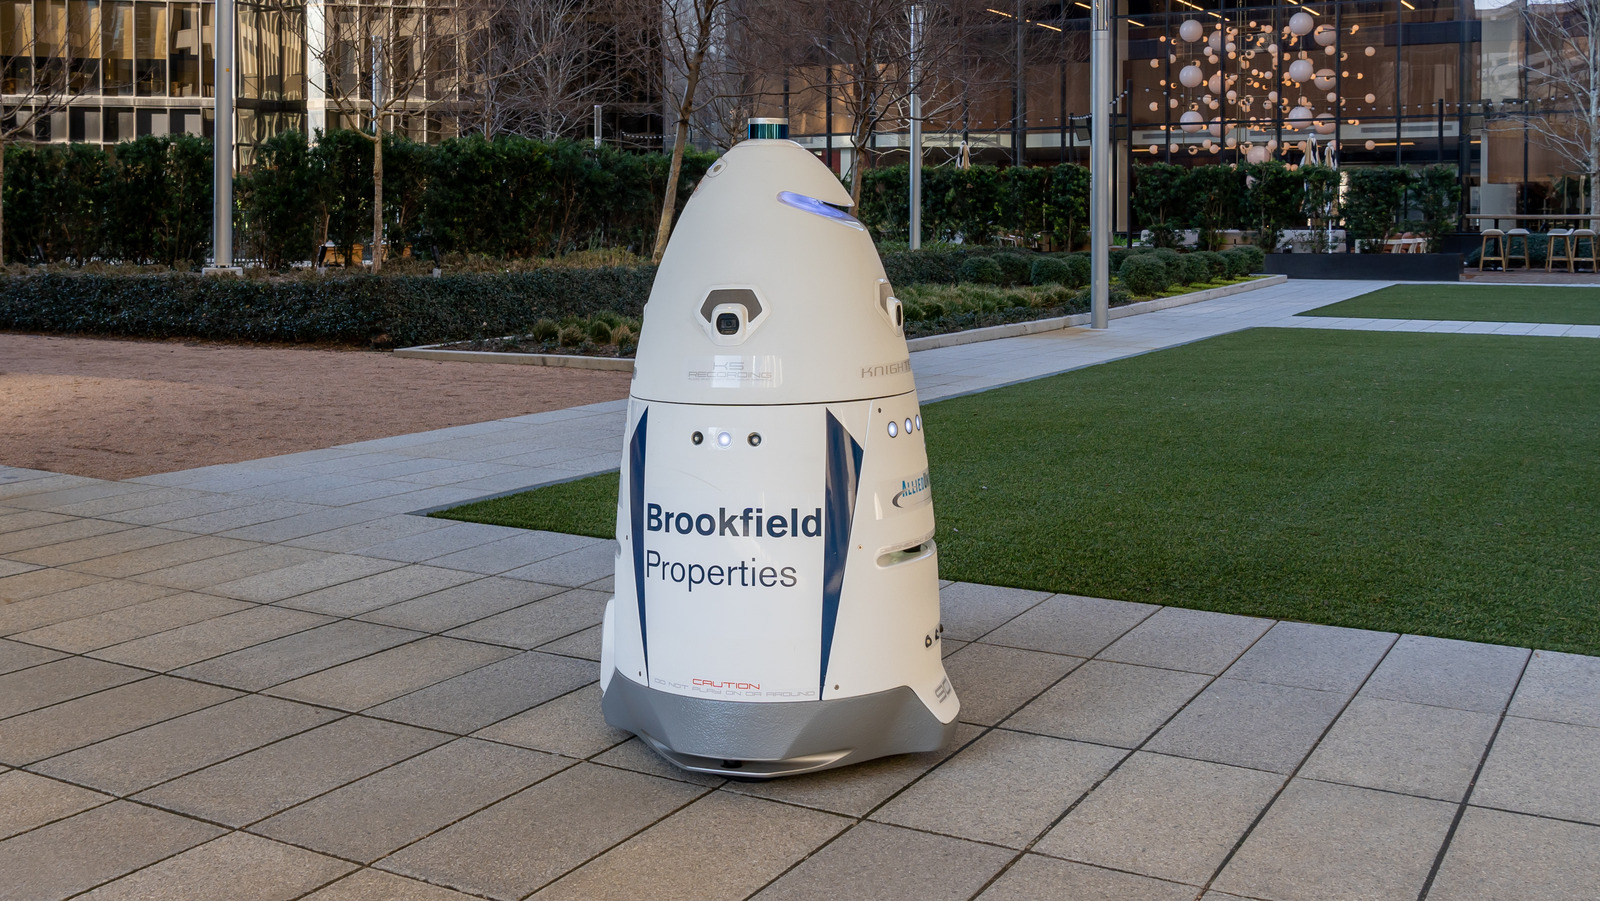 Meet The Dalek-Looking Security Robot From Knightscope